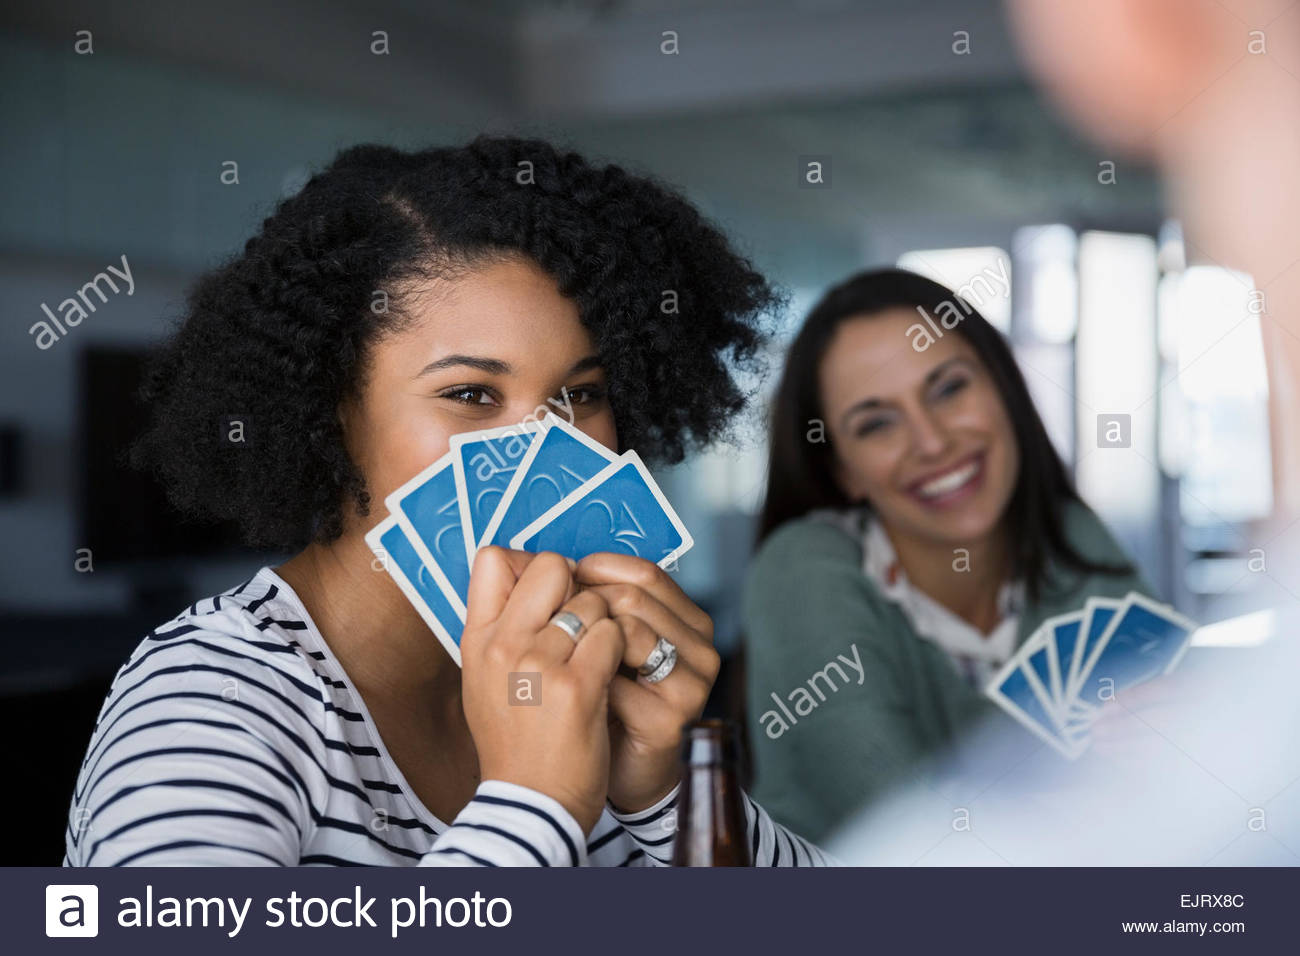 Woman hiding behind playing cards Stock Photo